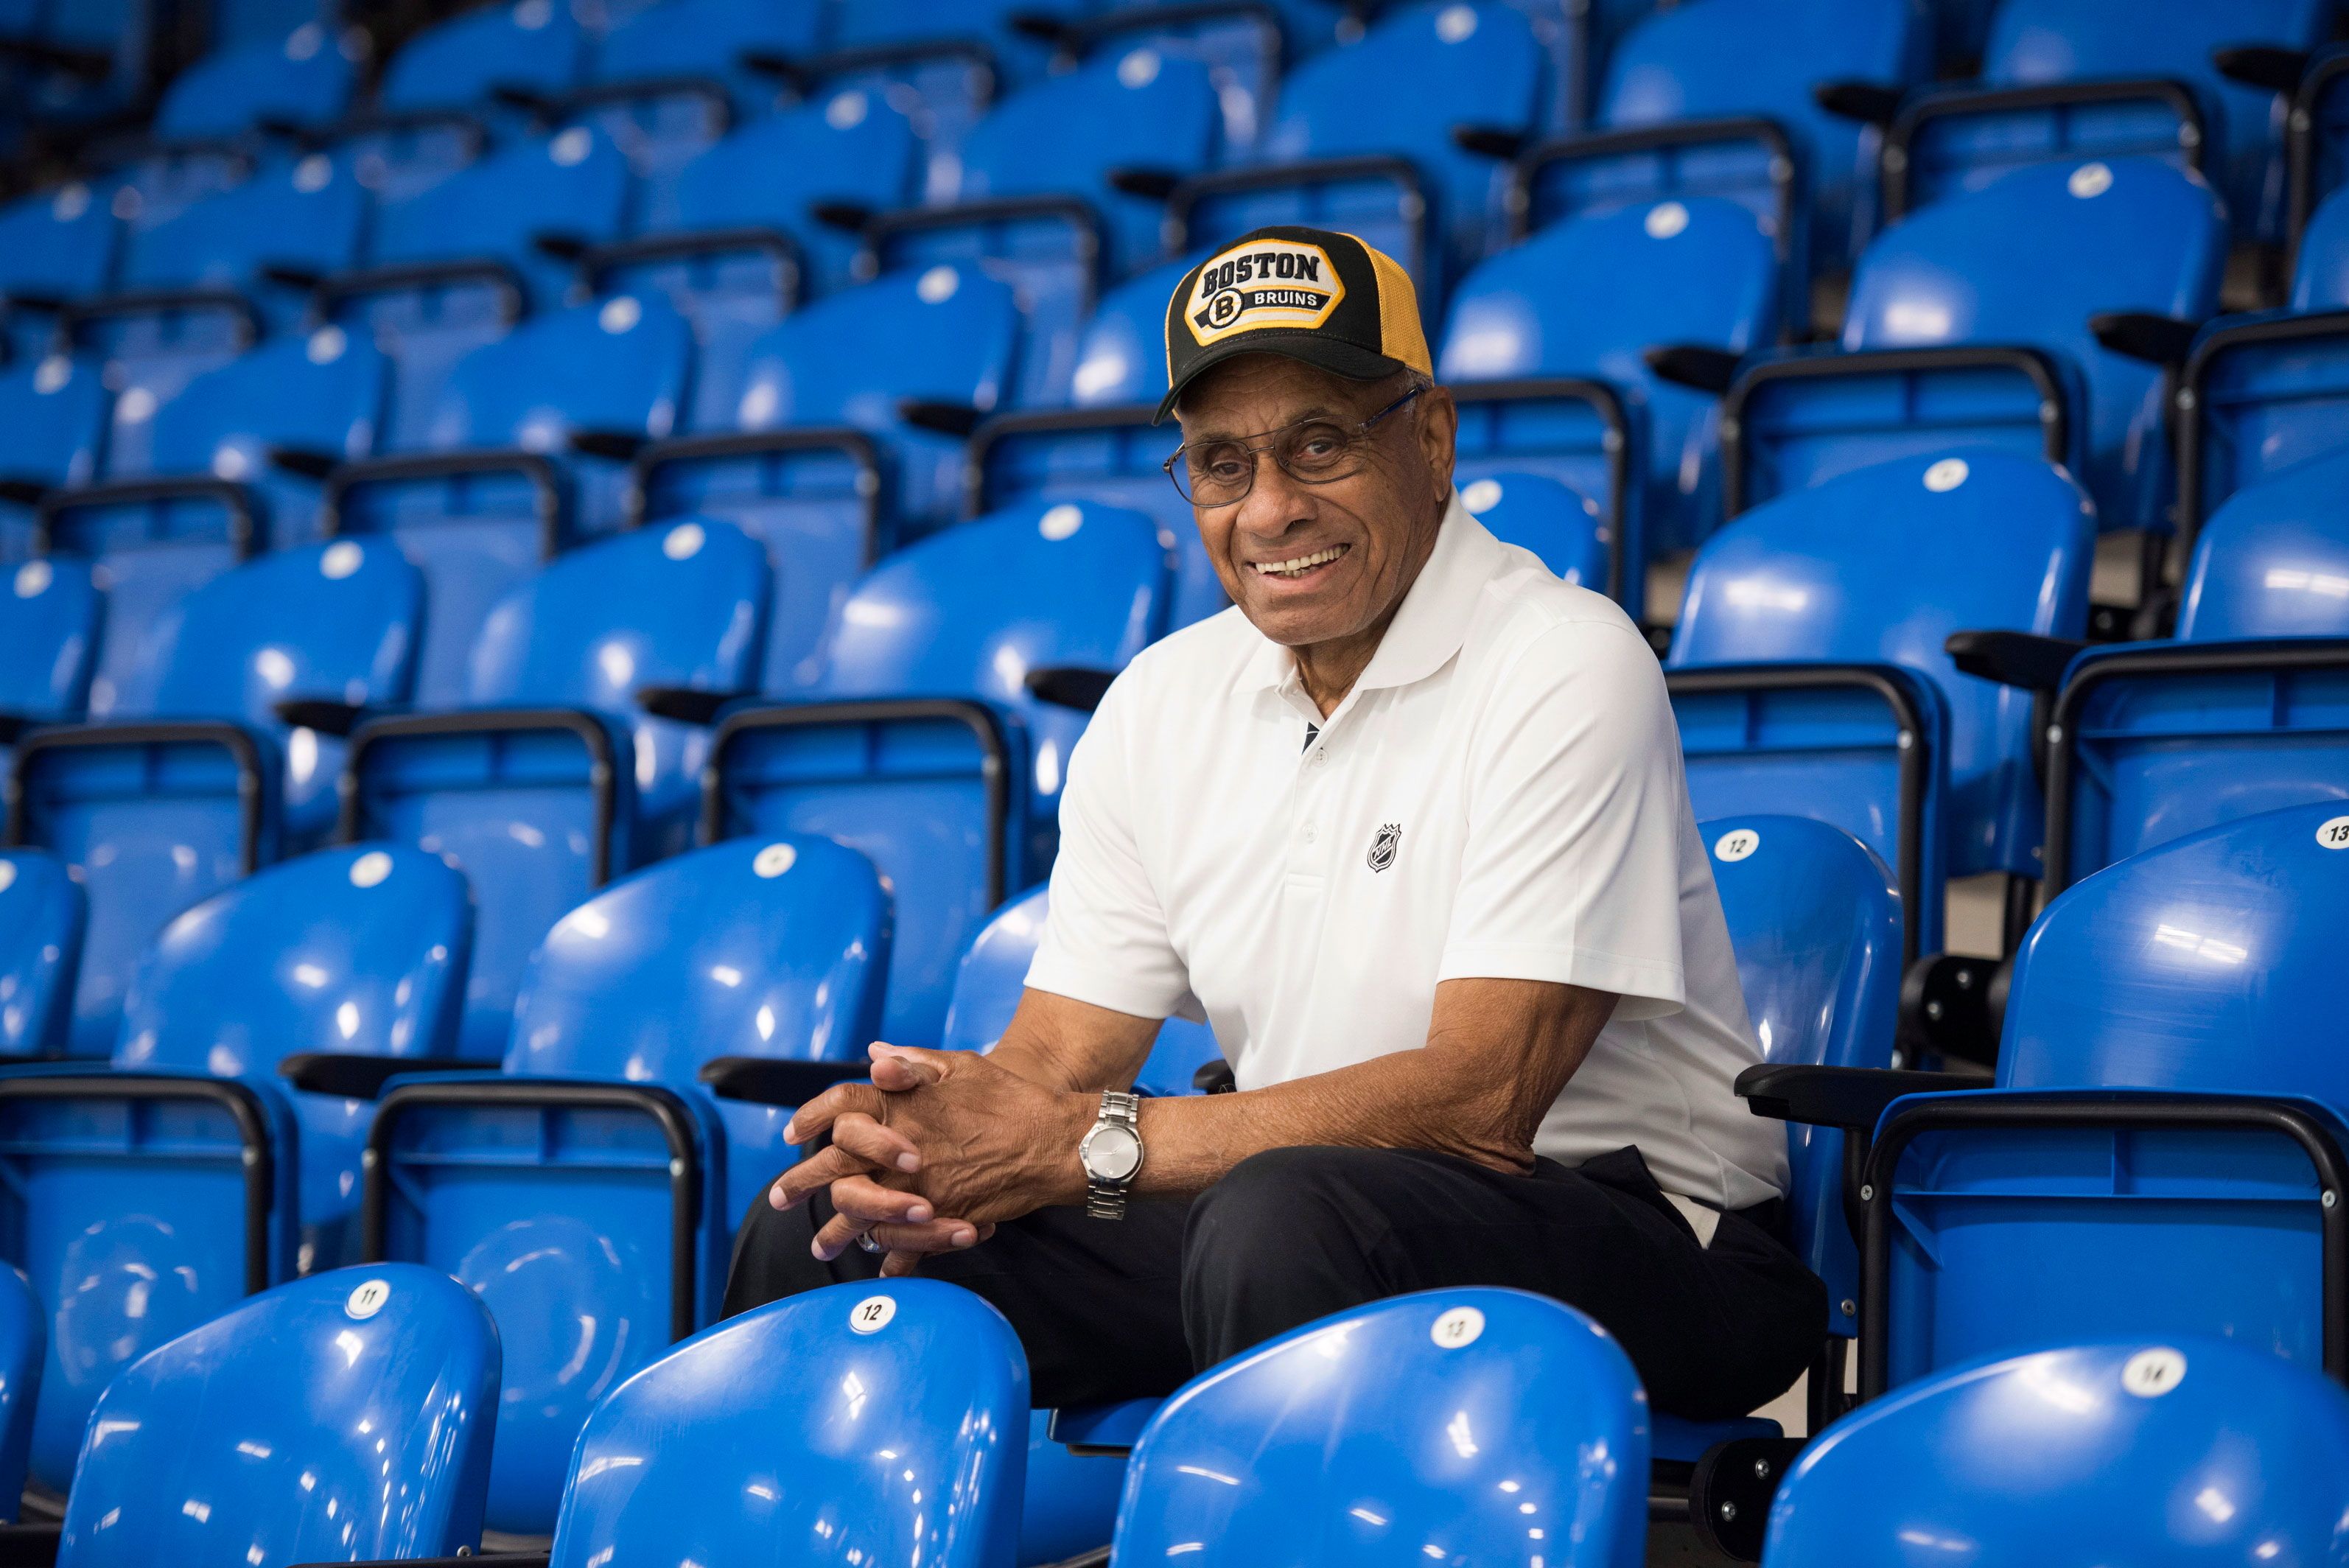 Bruins honor Willie O'Ree, NHL's first Black player